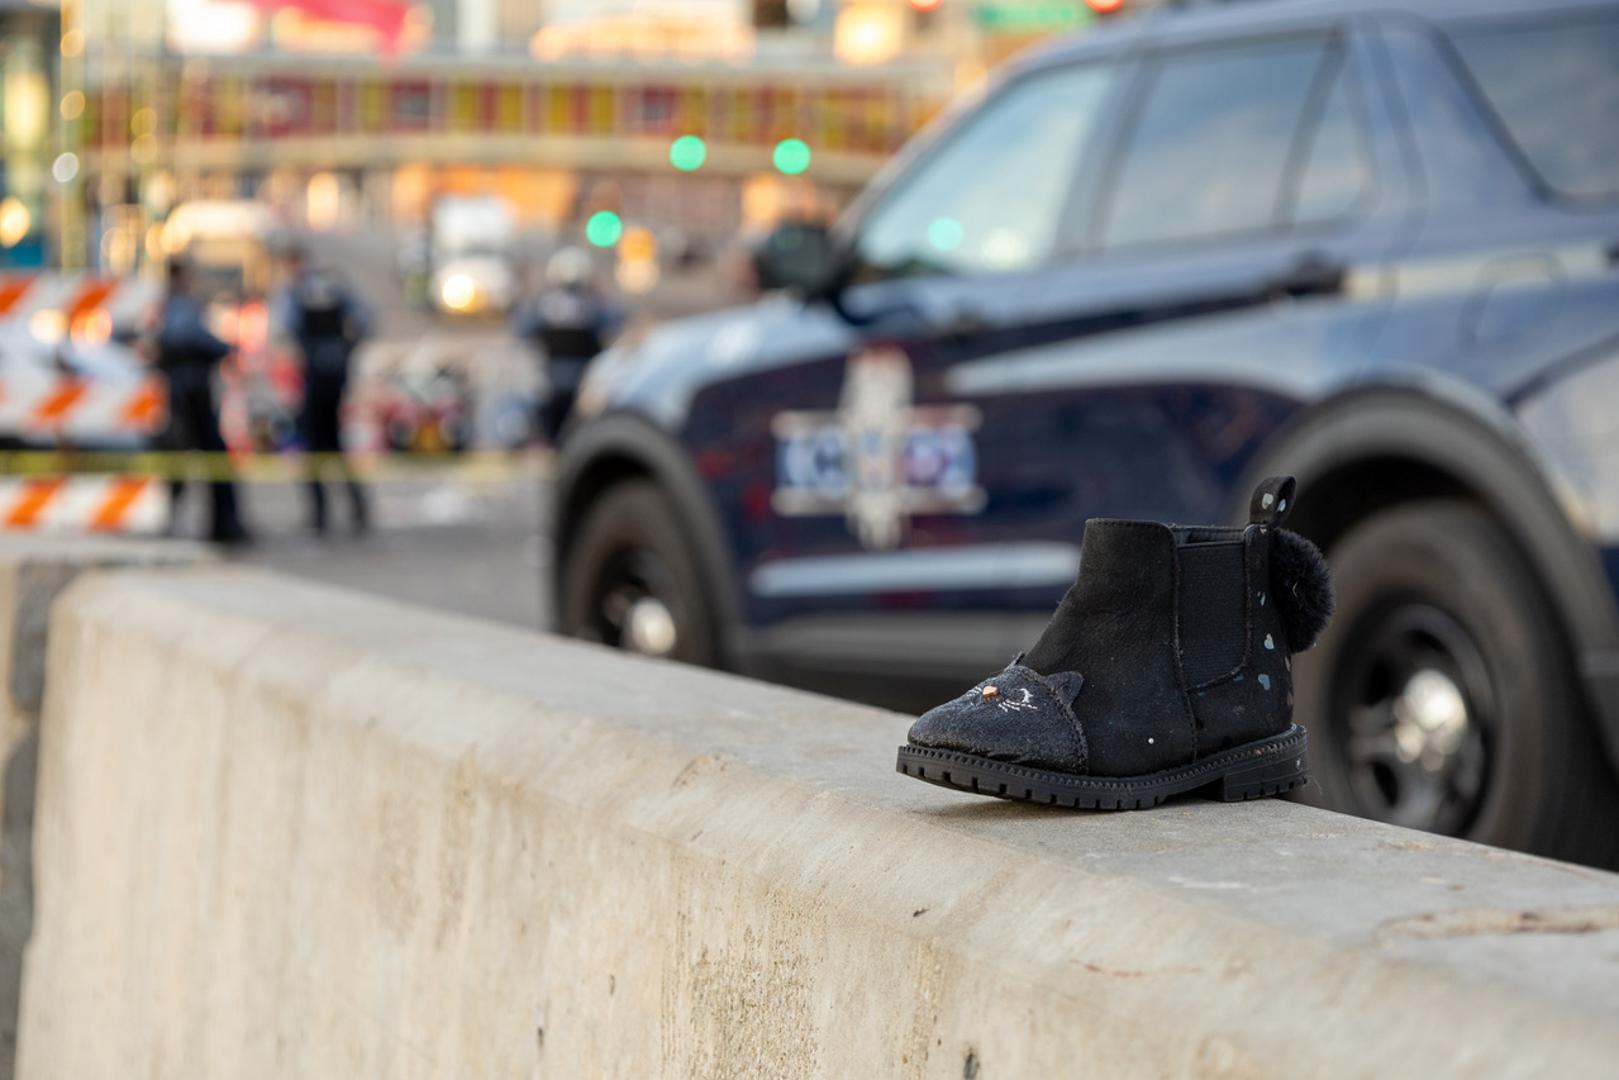 (240215) -- KANSAS CITY, Feb. 15, 2024 (Xinhua) -- A shoe is seen at the site following a shooting in Kansas City, Missouri, the United States, Feb. 14, 2024. At least one person was killed and 22 were injured as gunfire erupted during the Kansas City Chiefs' Super Bowl victory parade in Kansas City, U.S. state of Missouri, Stacey Graves, chief of the Kansas City Missouri Police Department, said at a news conference on Wednesday afternoon. (Photo by Robert Reed/Xinhua) Photo: Robert Reed/XINHUA